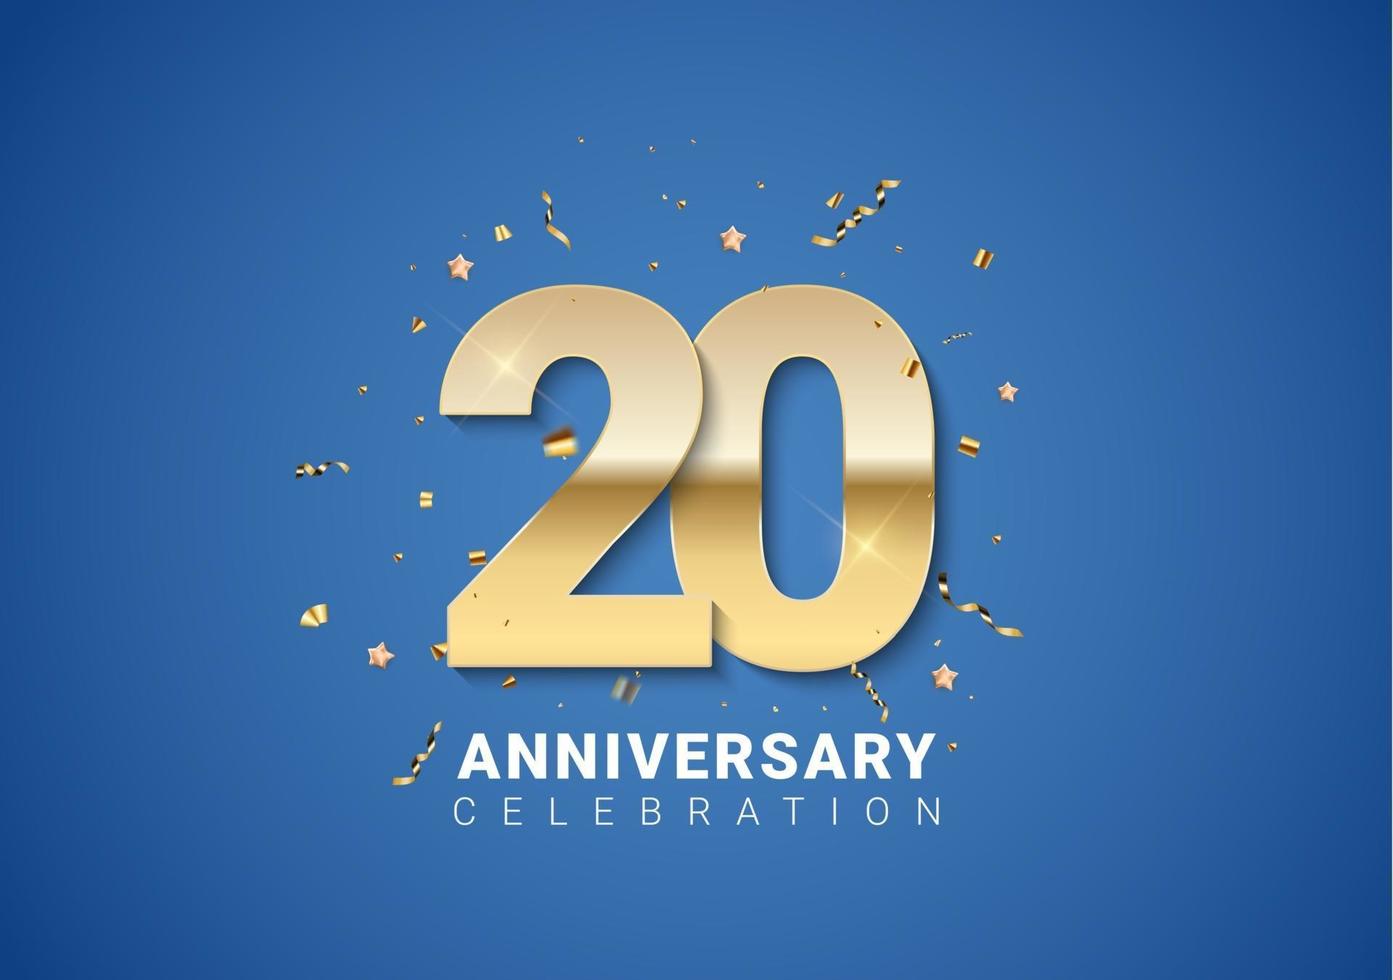 20 anniversary background with golden numbers, confetti, stars vector